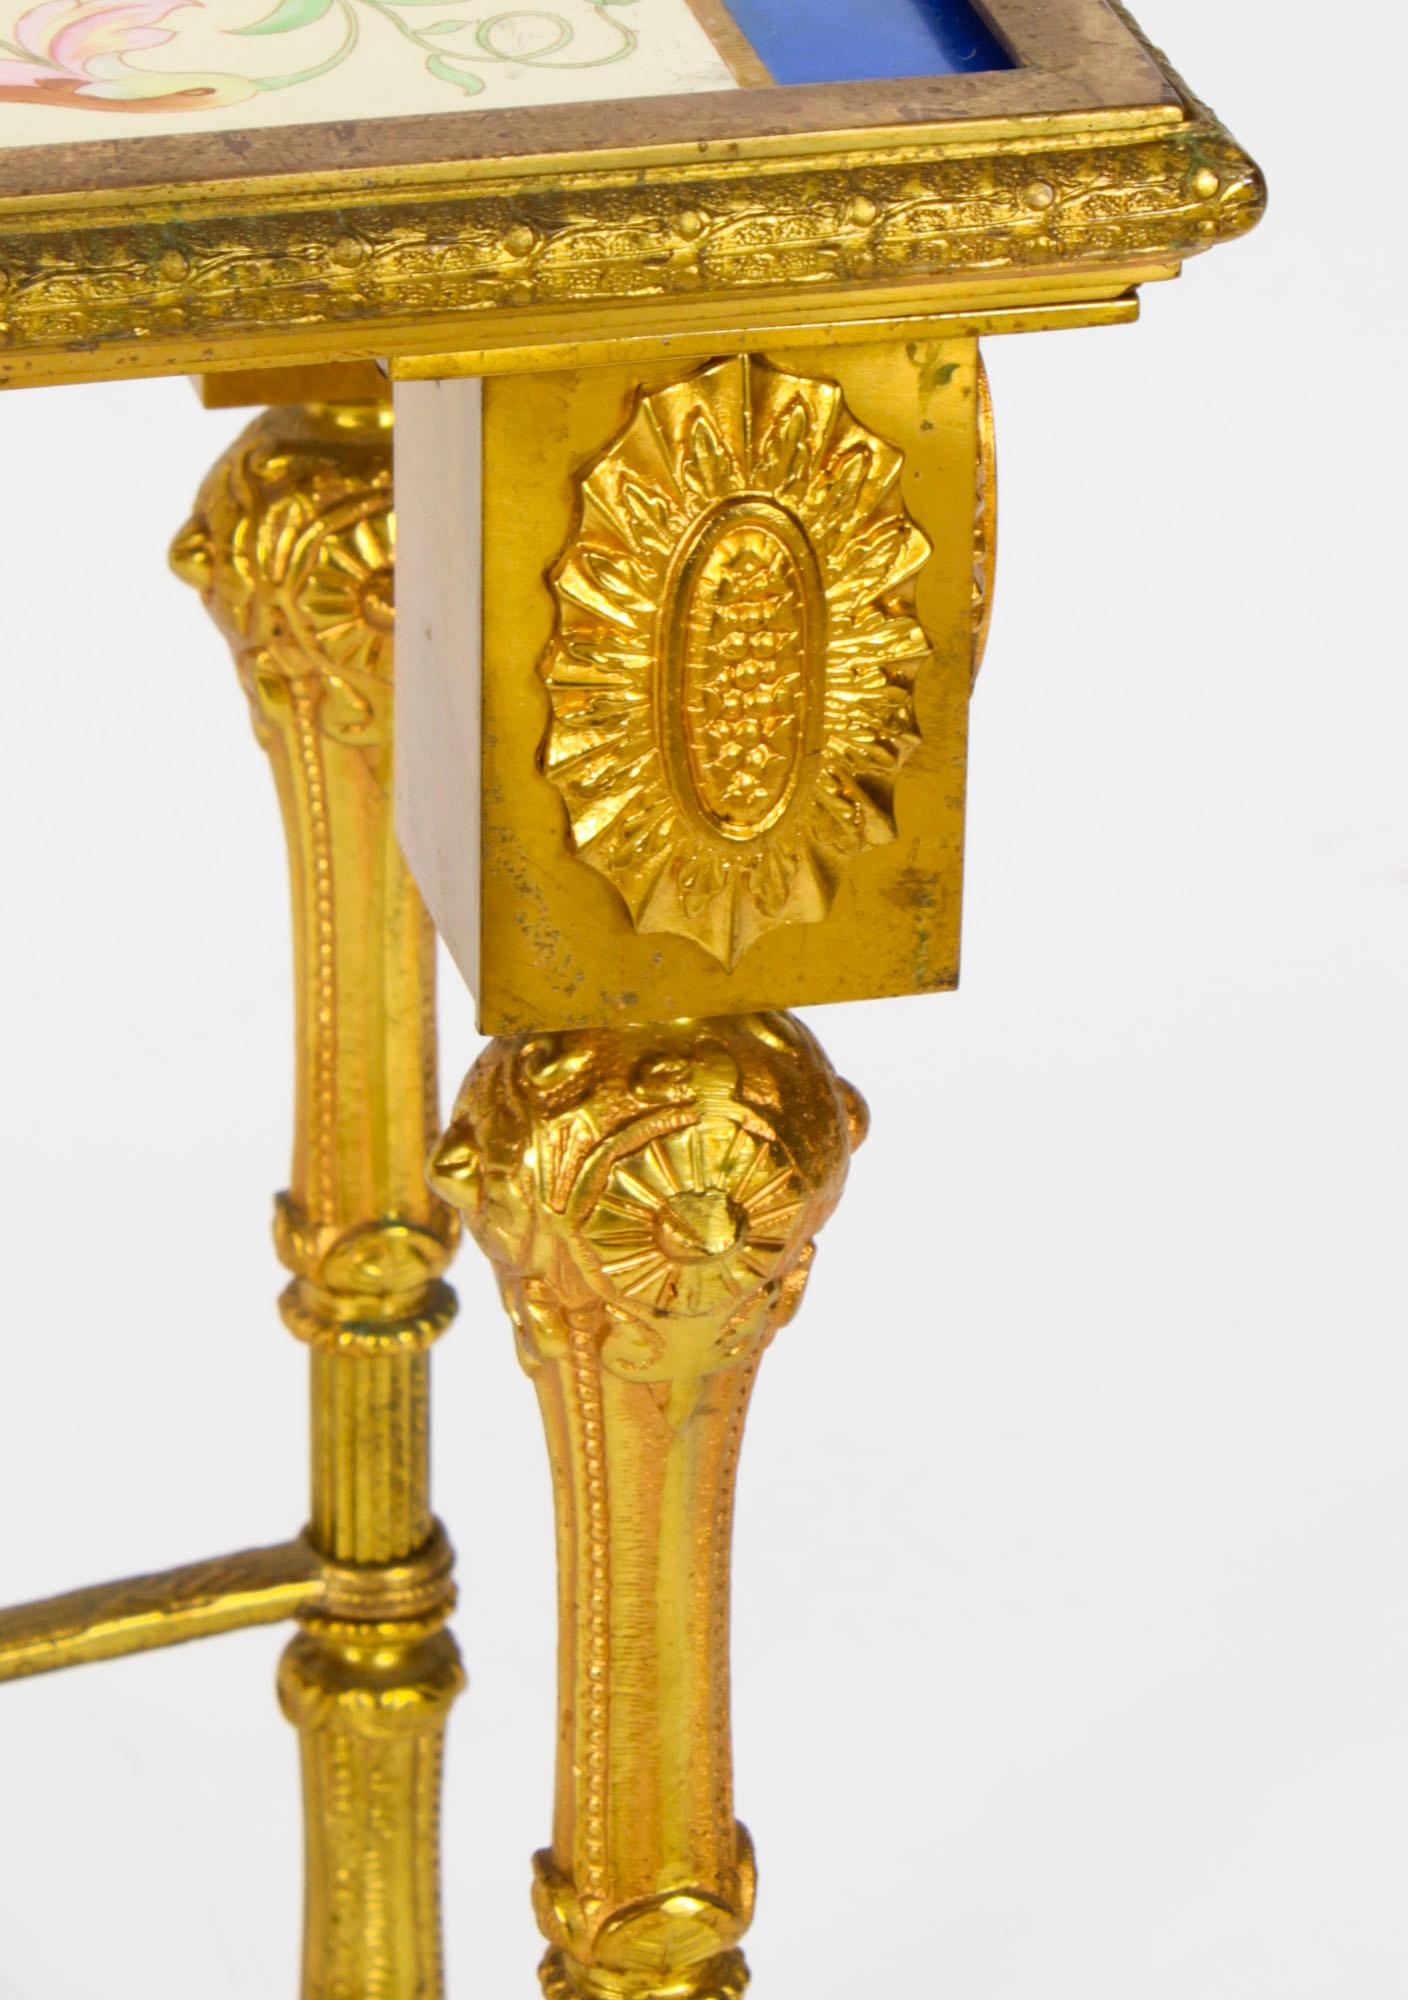 Antique Regency Revival Ormolu Mounted Table Display Stand Late 19th C 5